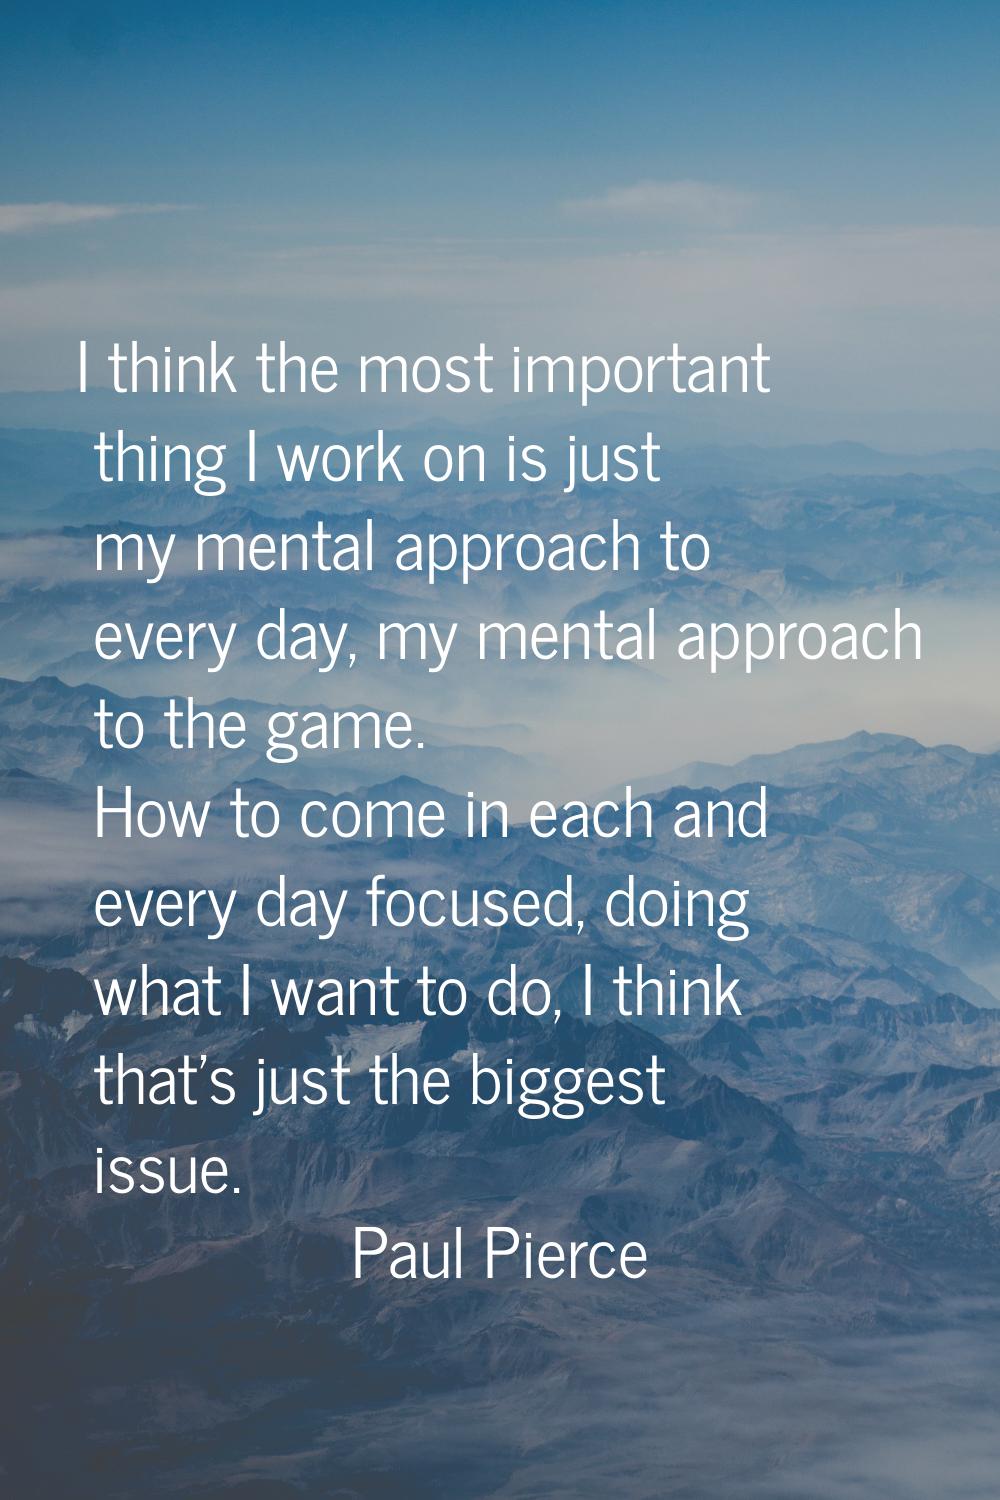 I think the most important thing I work on is just my mental approach to every day, my mental appro